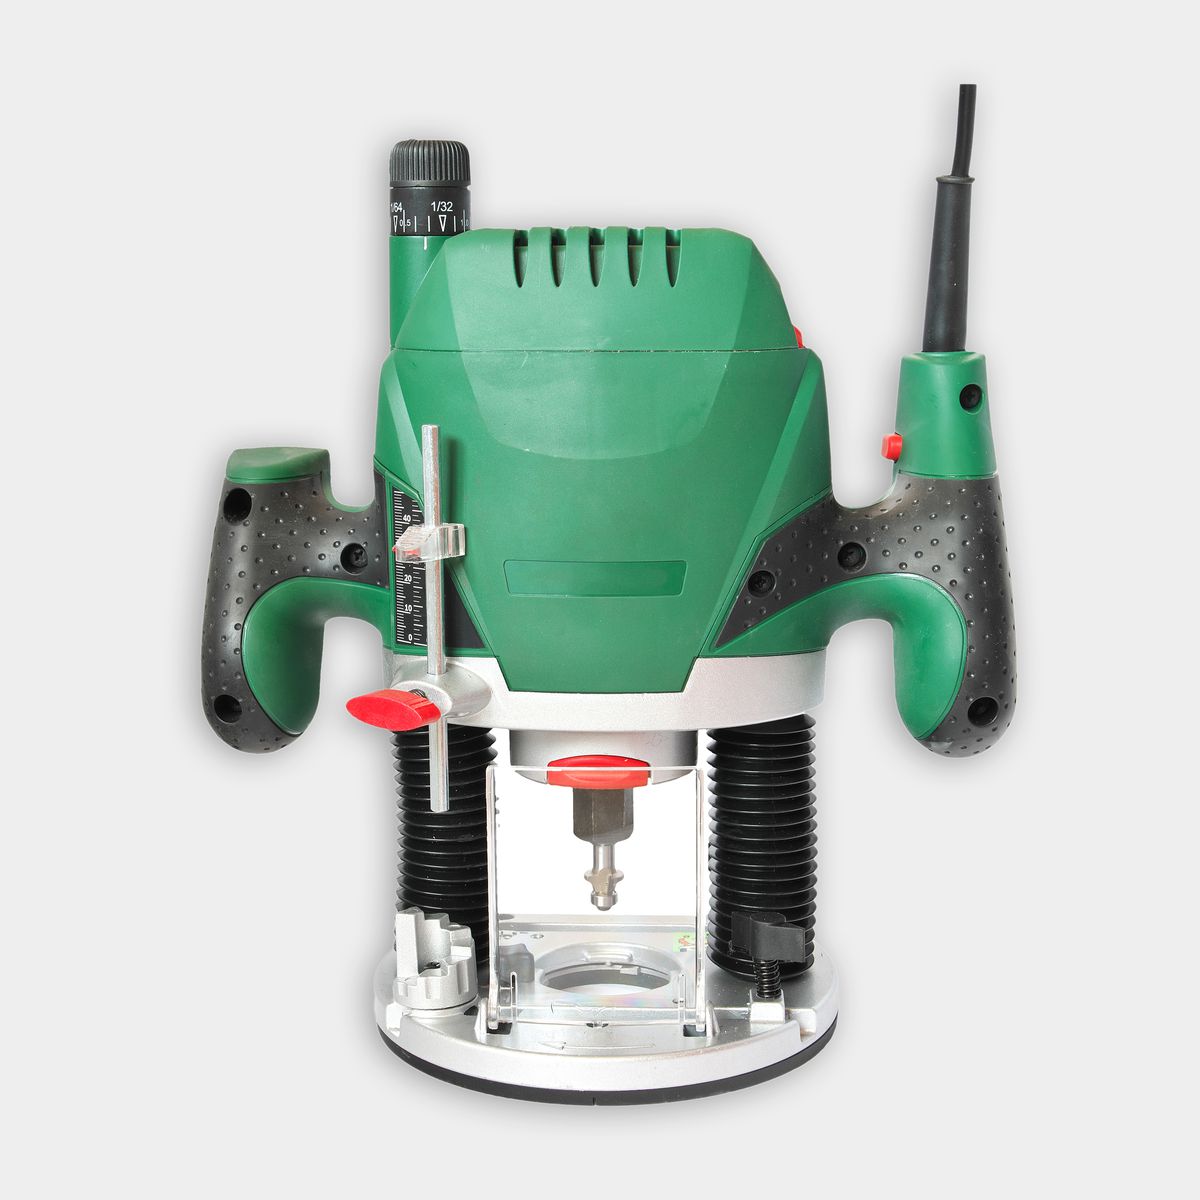 Green handheld router on a gray background